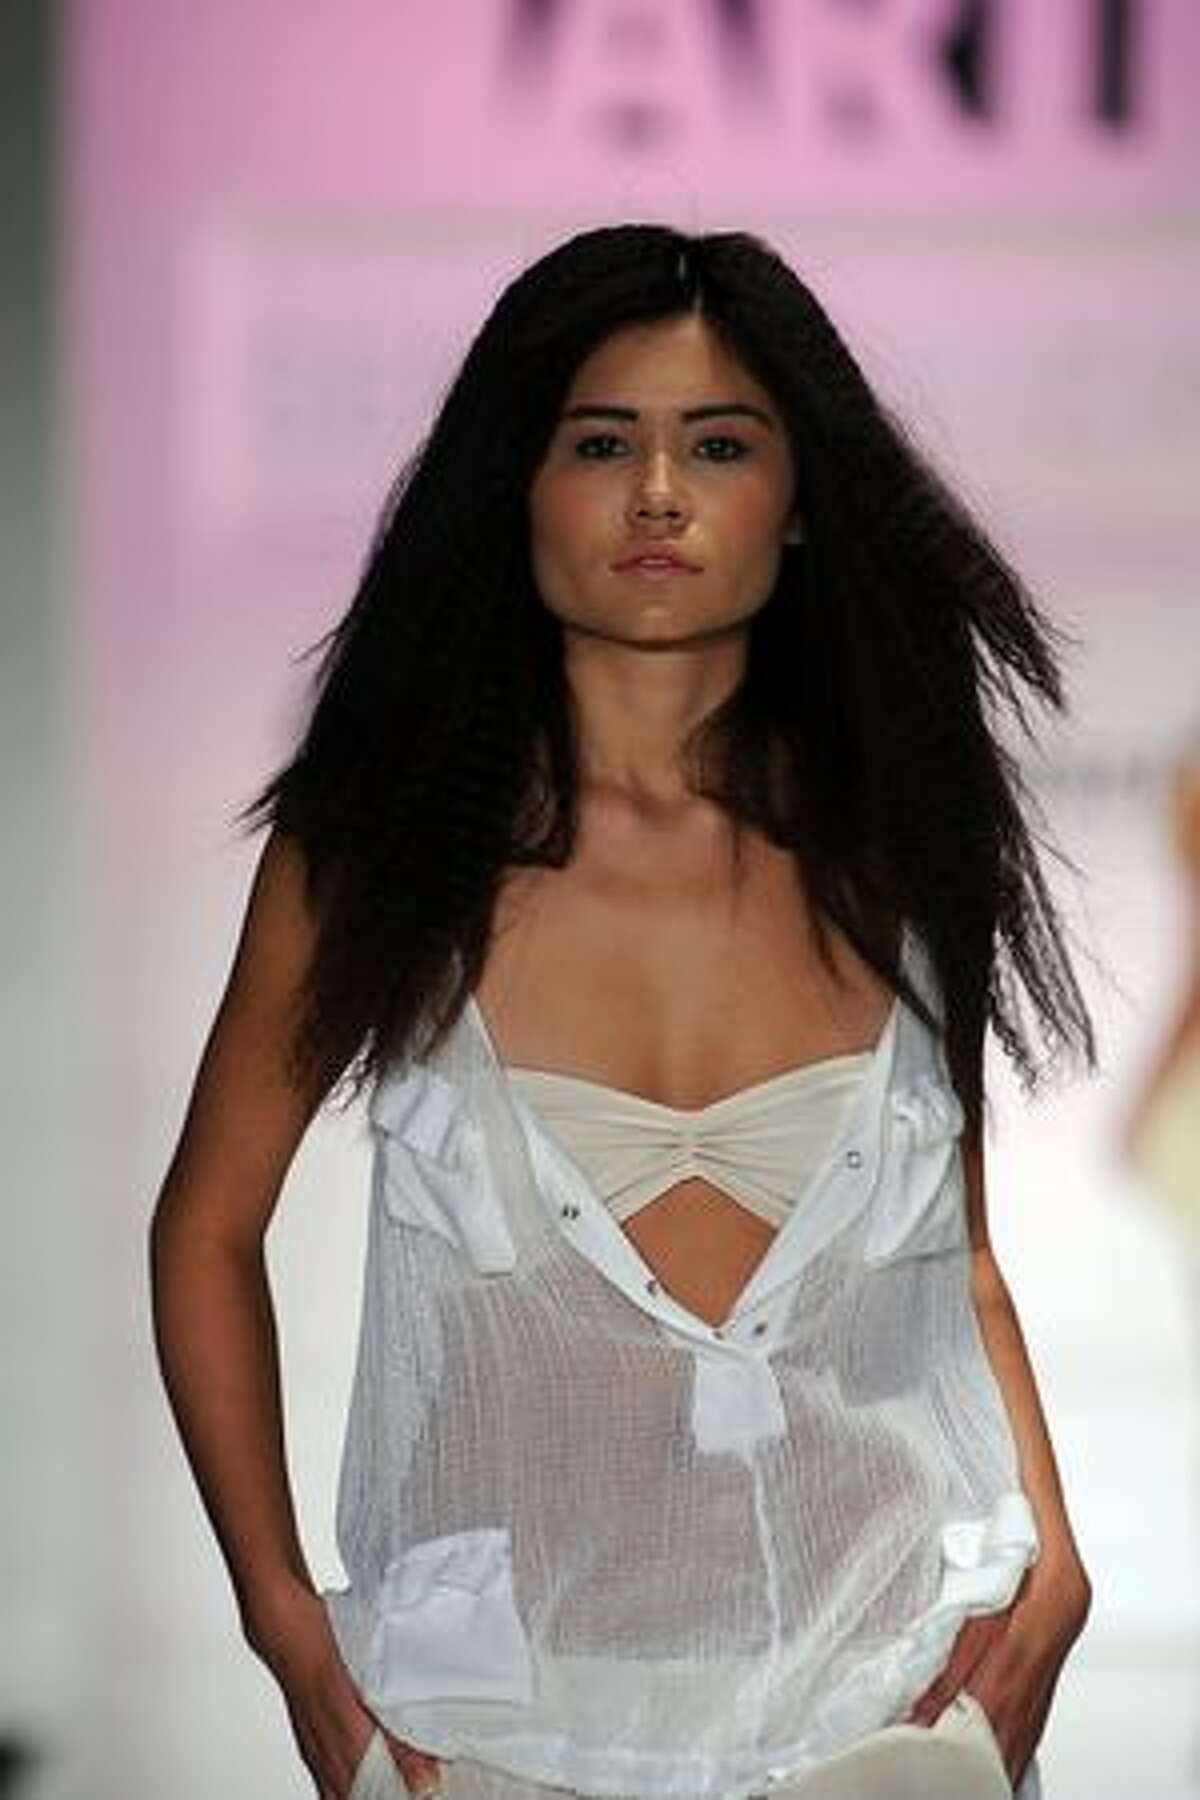 A model wears Seneca Rising on the runway at Gen Art's 12th Annual "Fresh Faces In Fashion" at the Petersen Automotive Museum in Los Angeles, California.